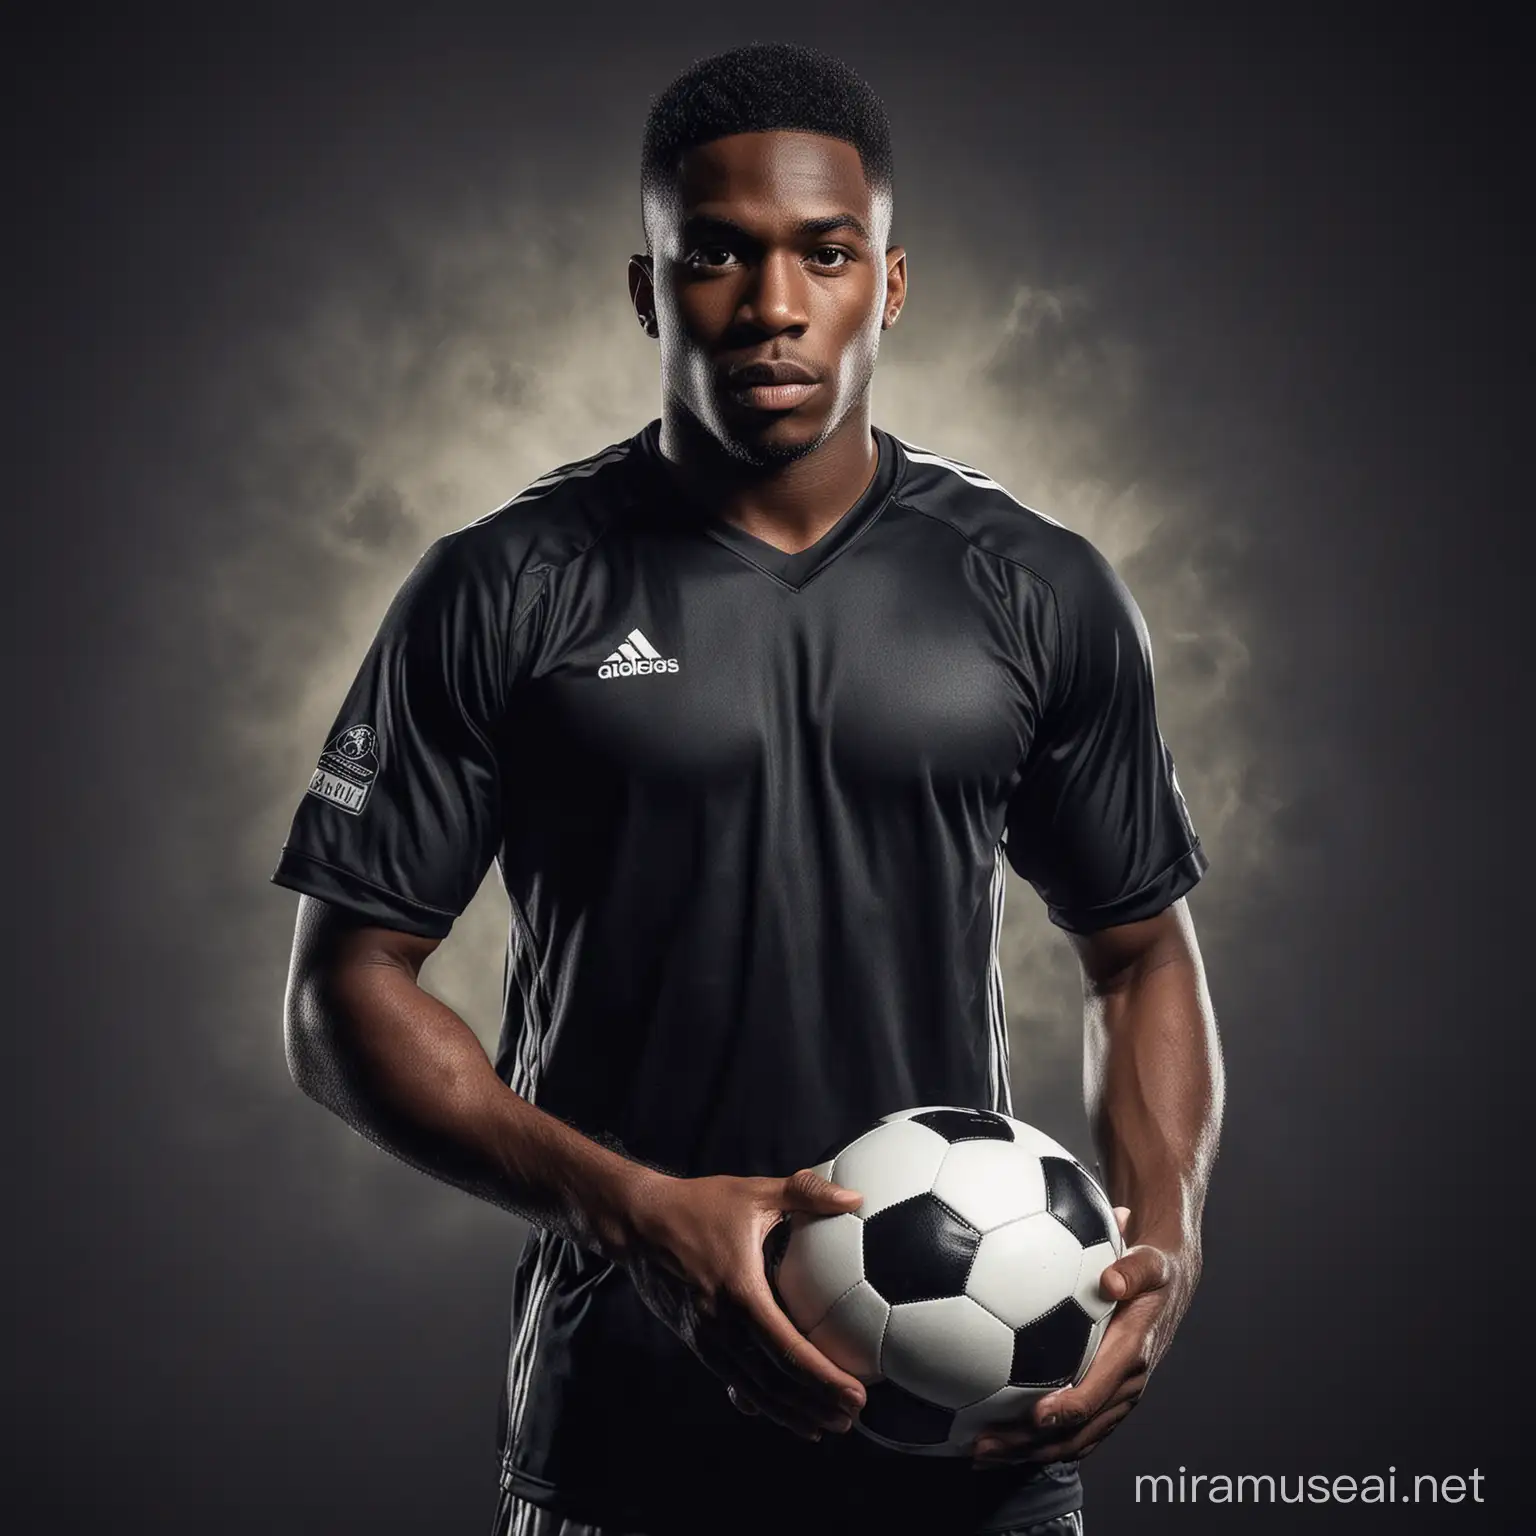 A black male soccer player, holding a football, on a dramatic background